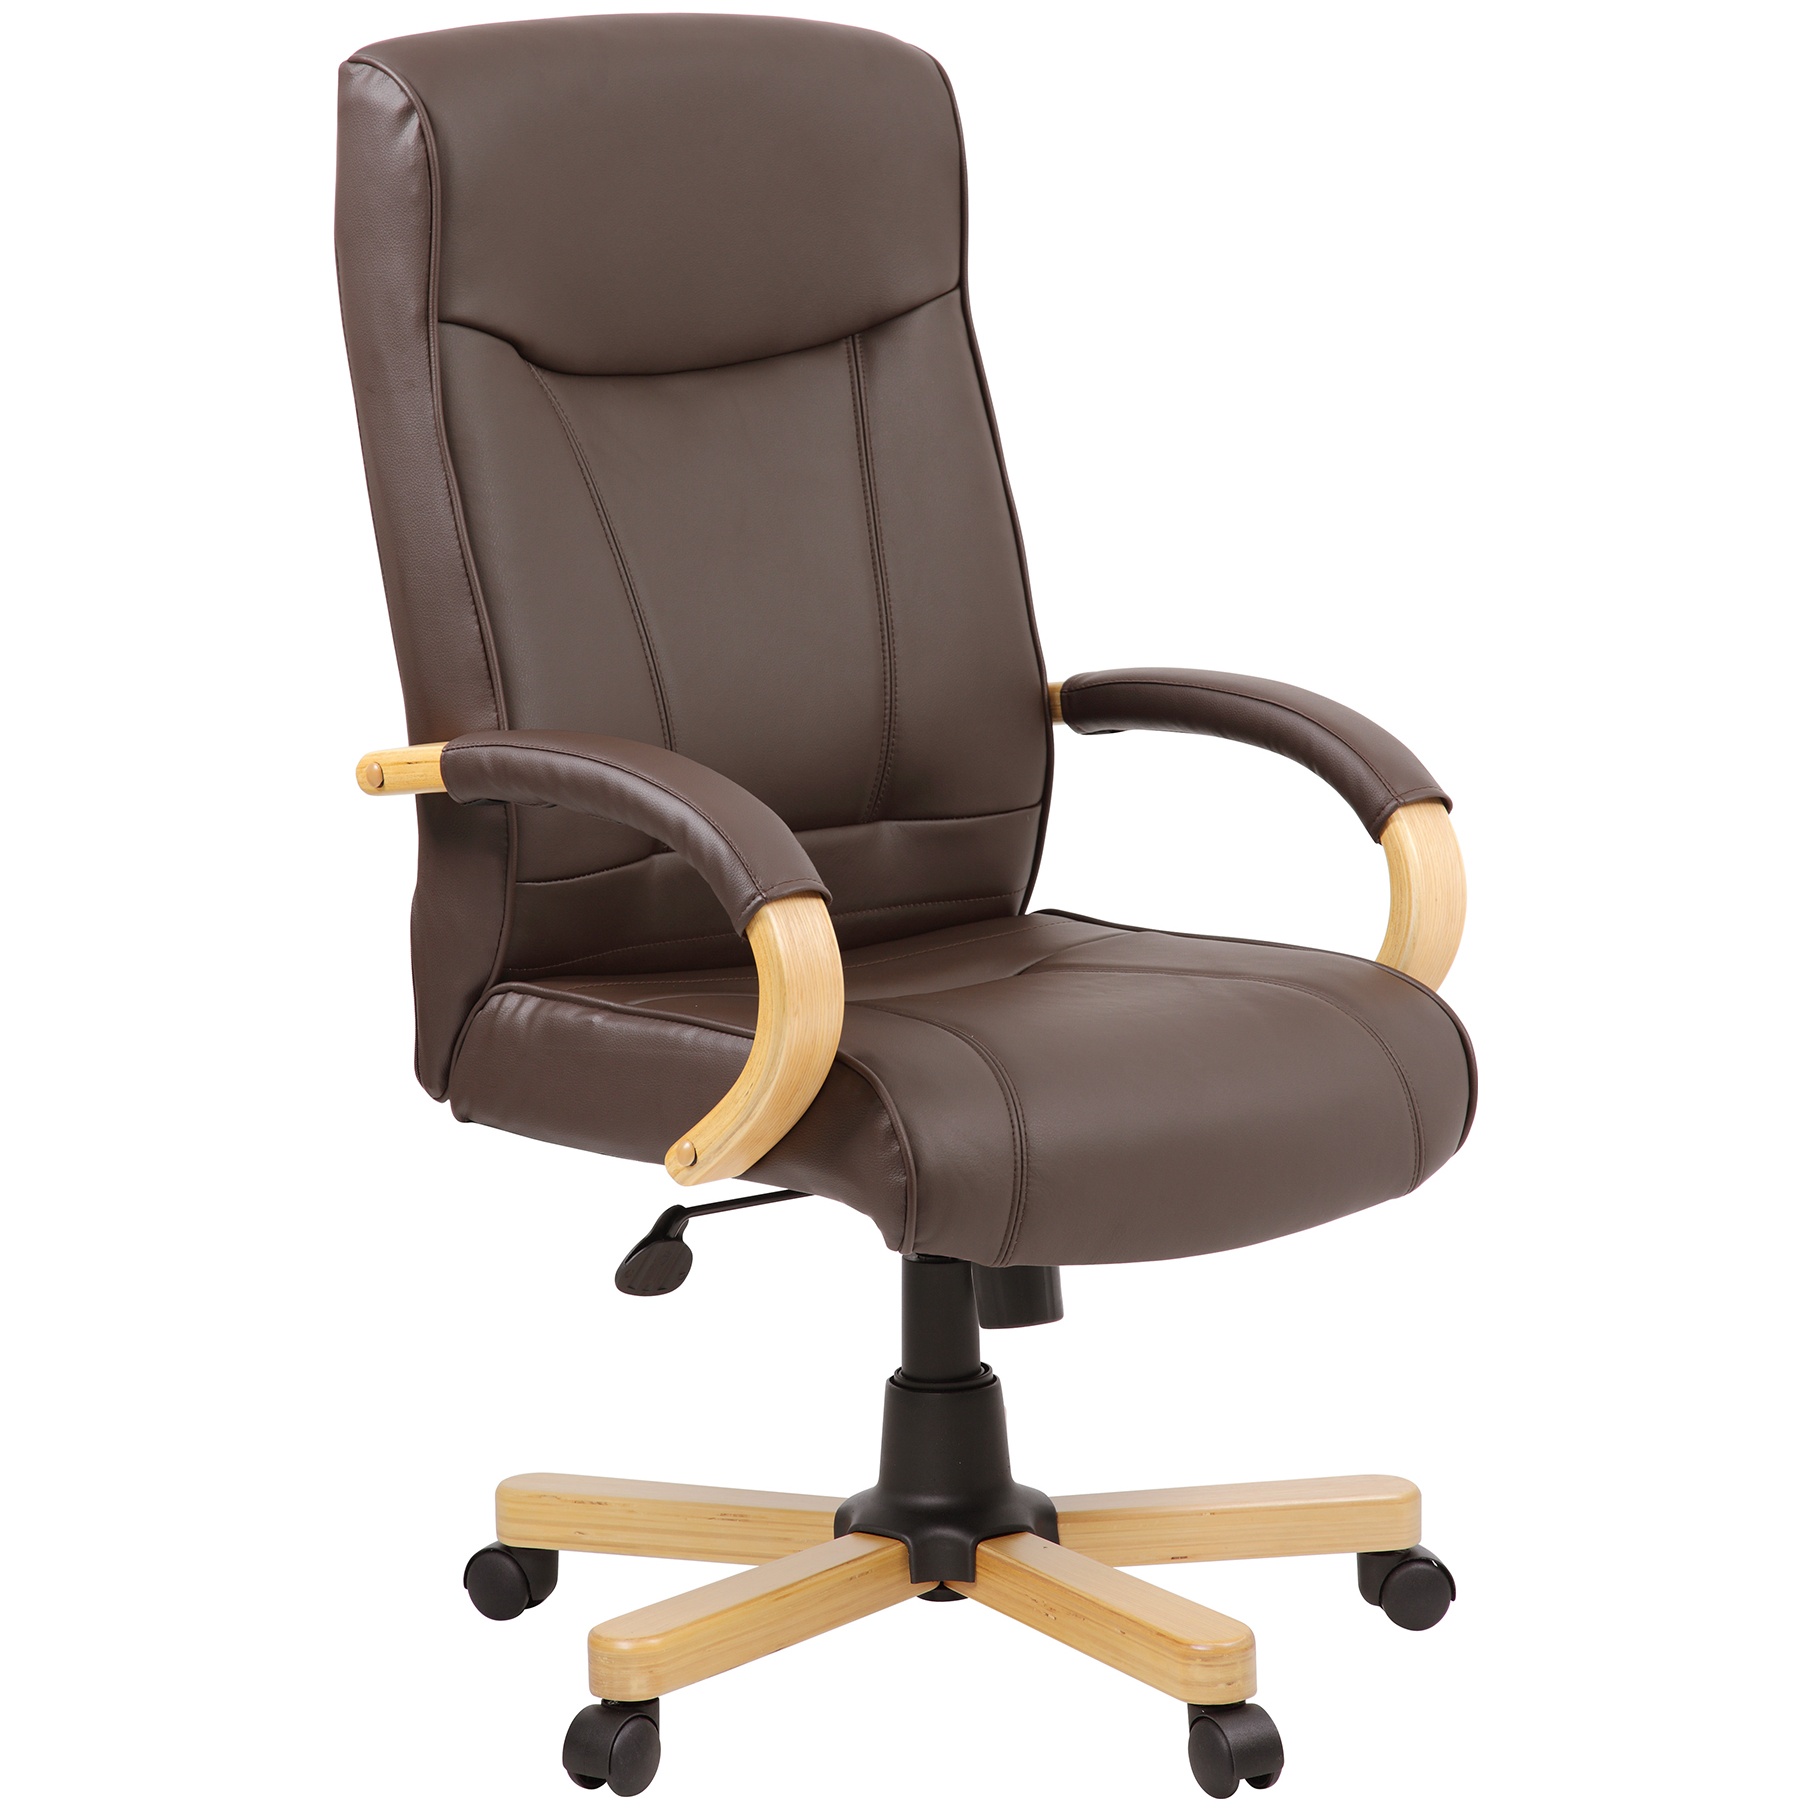 Farnham Brown Leather Office Chair, Brown Leather Reception Chairs